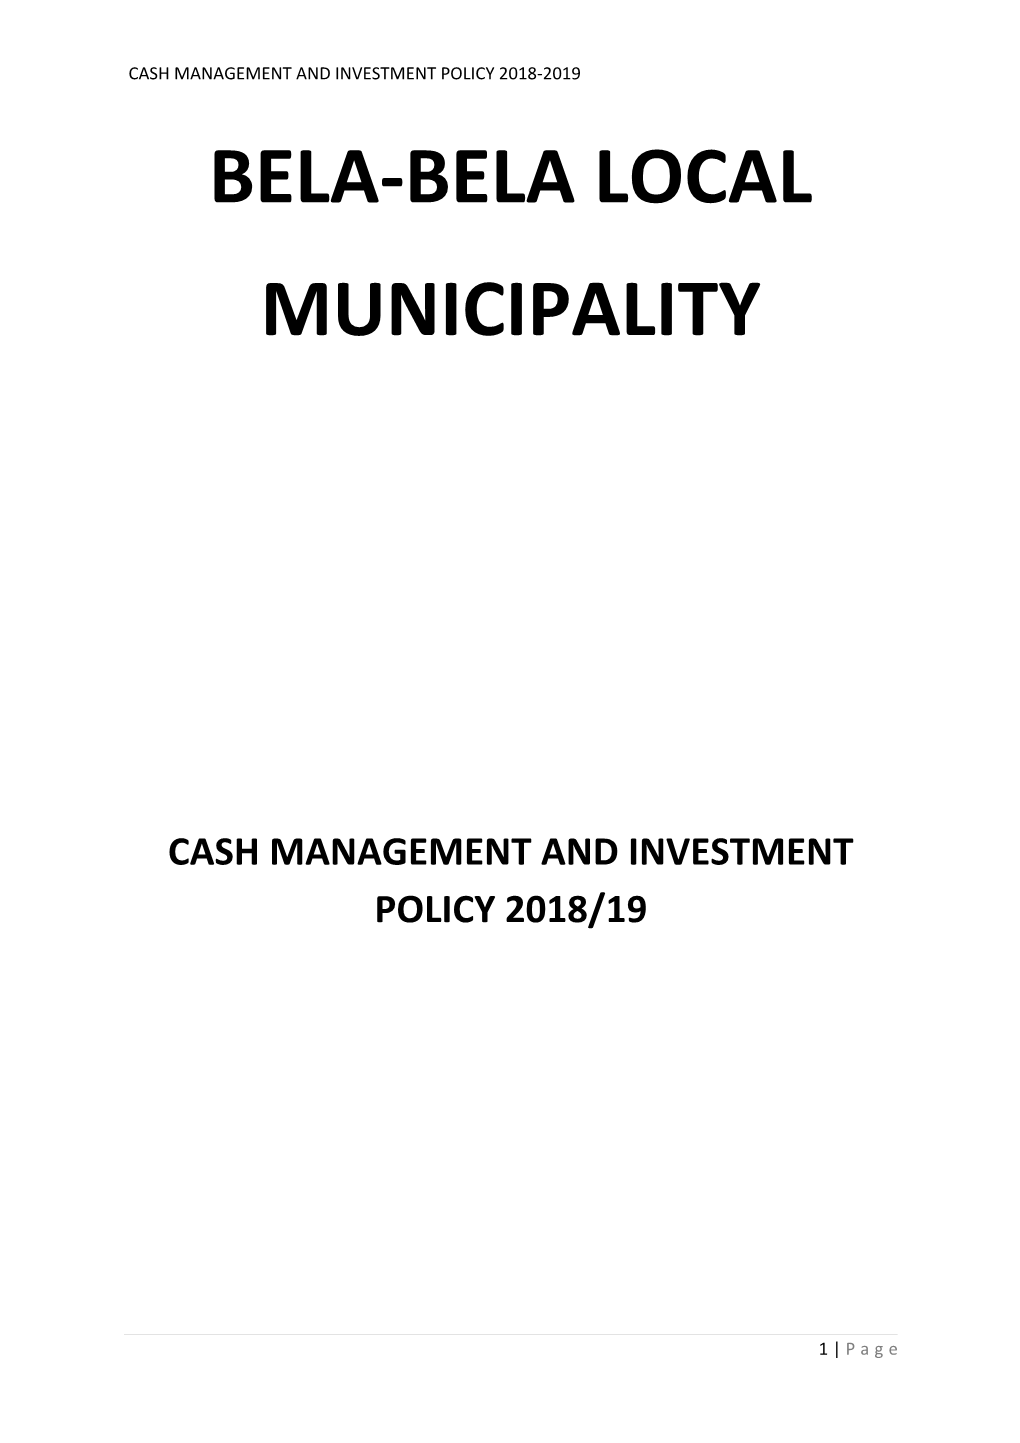 Cash Management and Investment Policy 2018/19